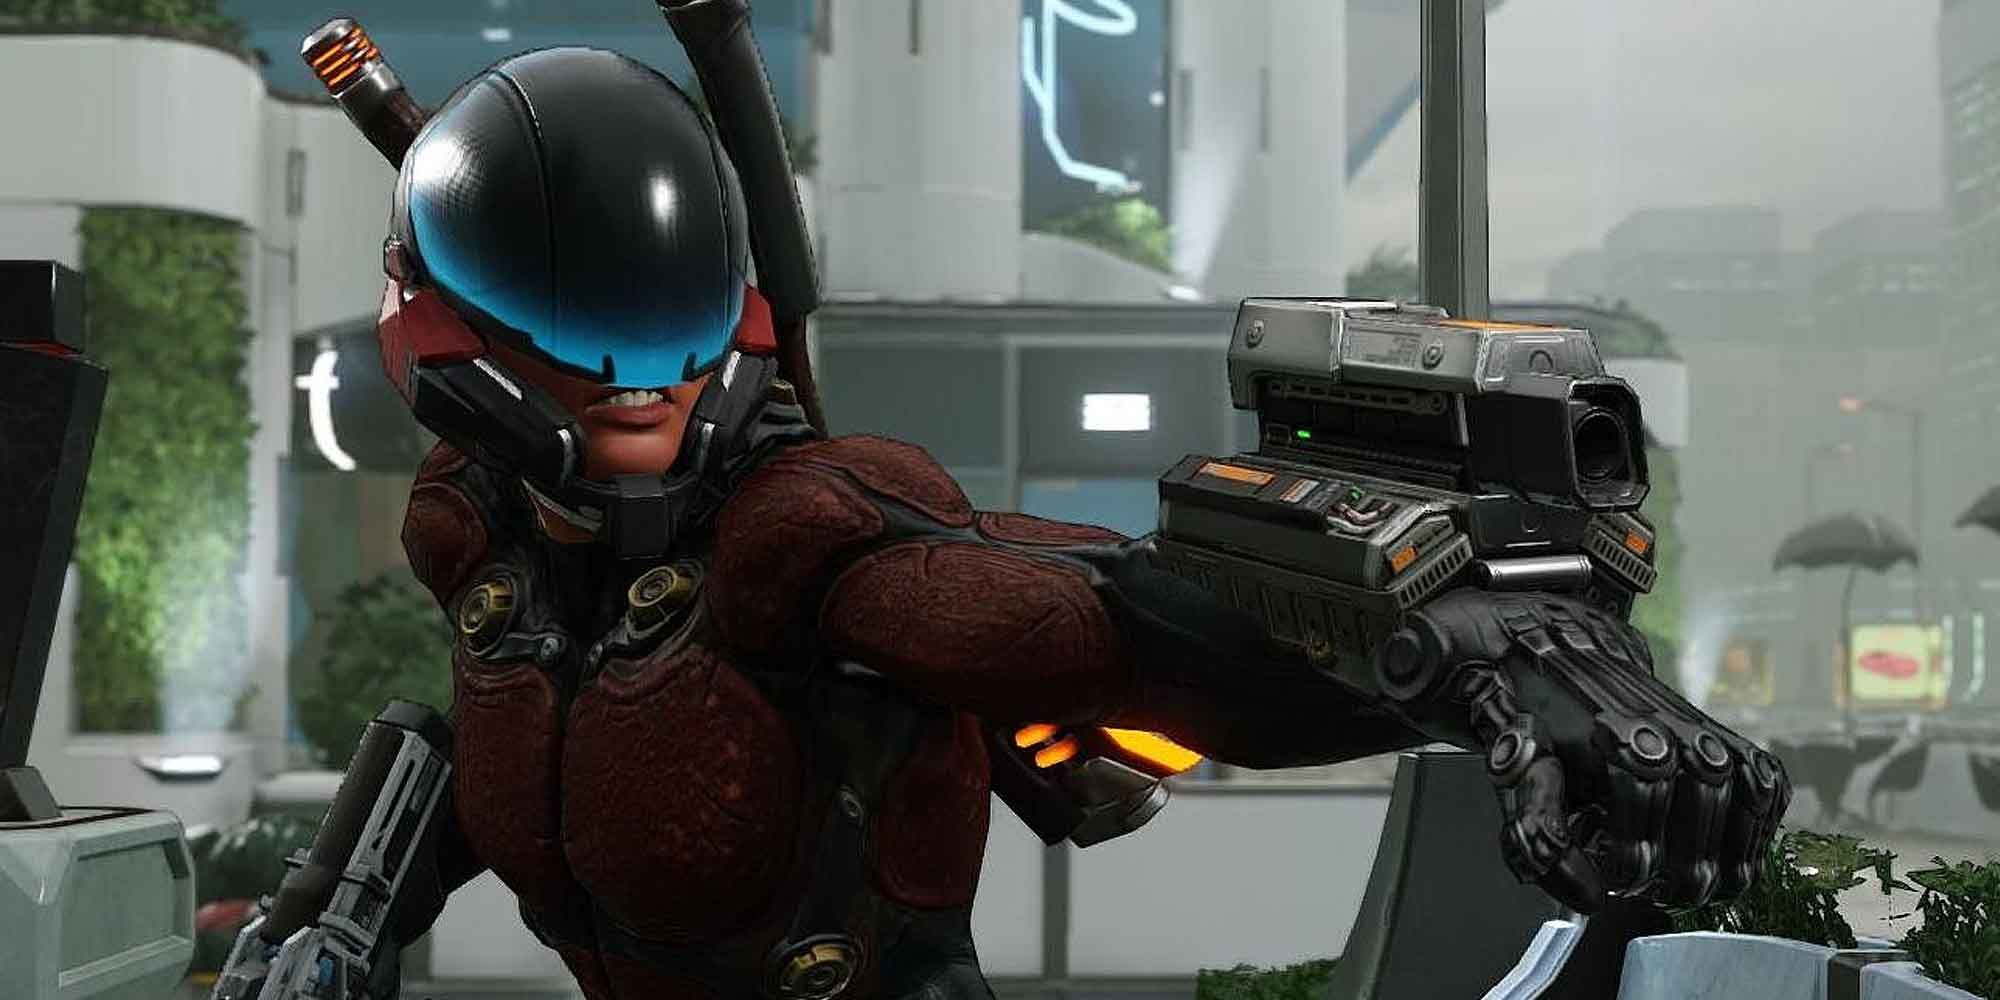 A soldier wearing the Warden Armor in Xcom 2